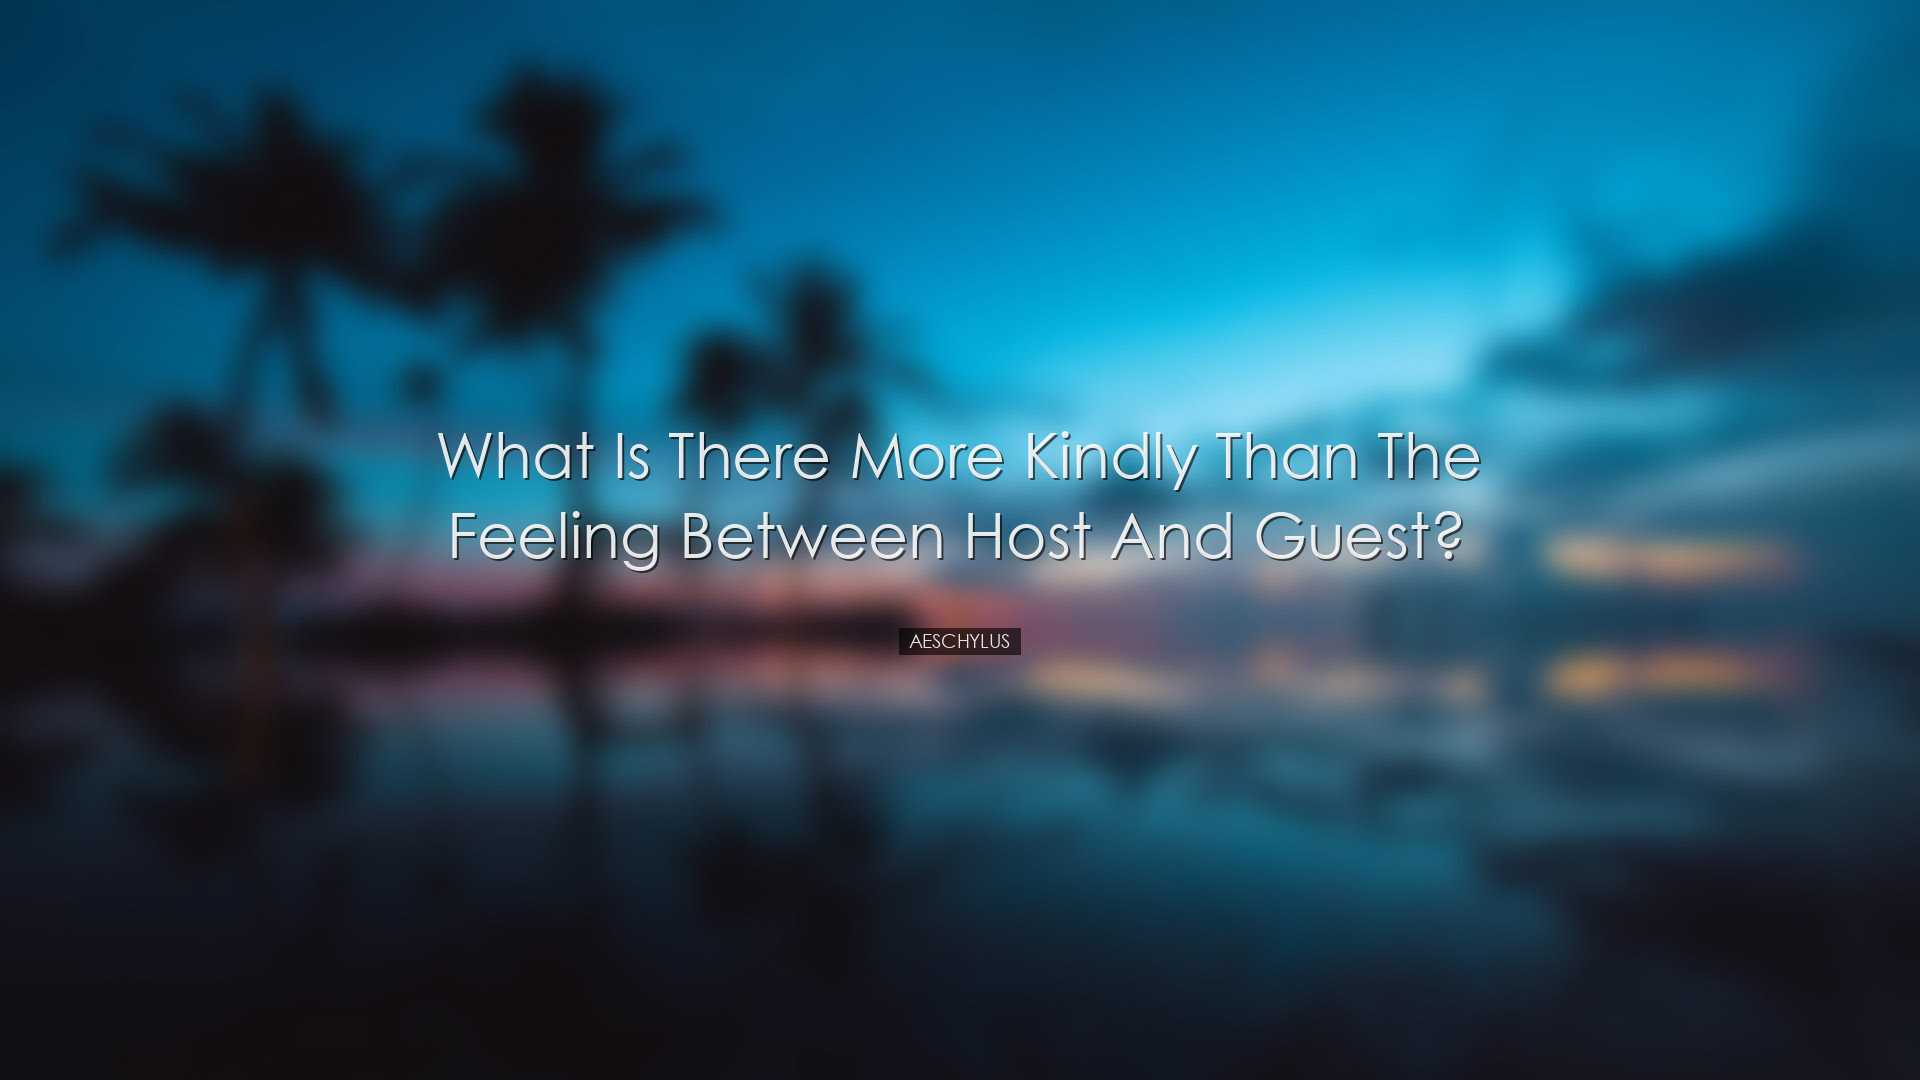 What is there more kindly than the feeling between host and guest?